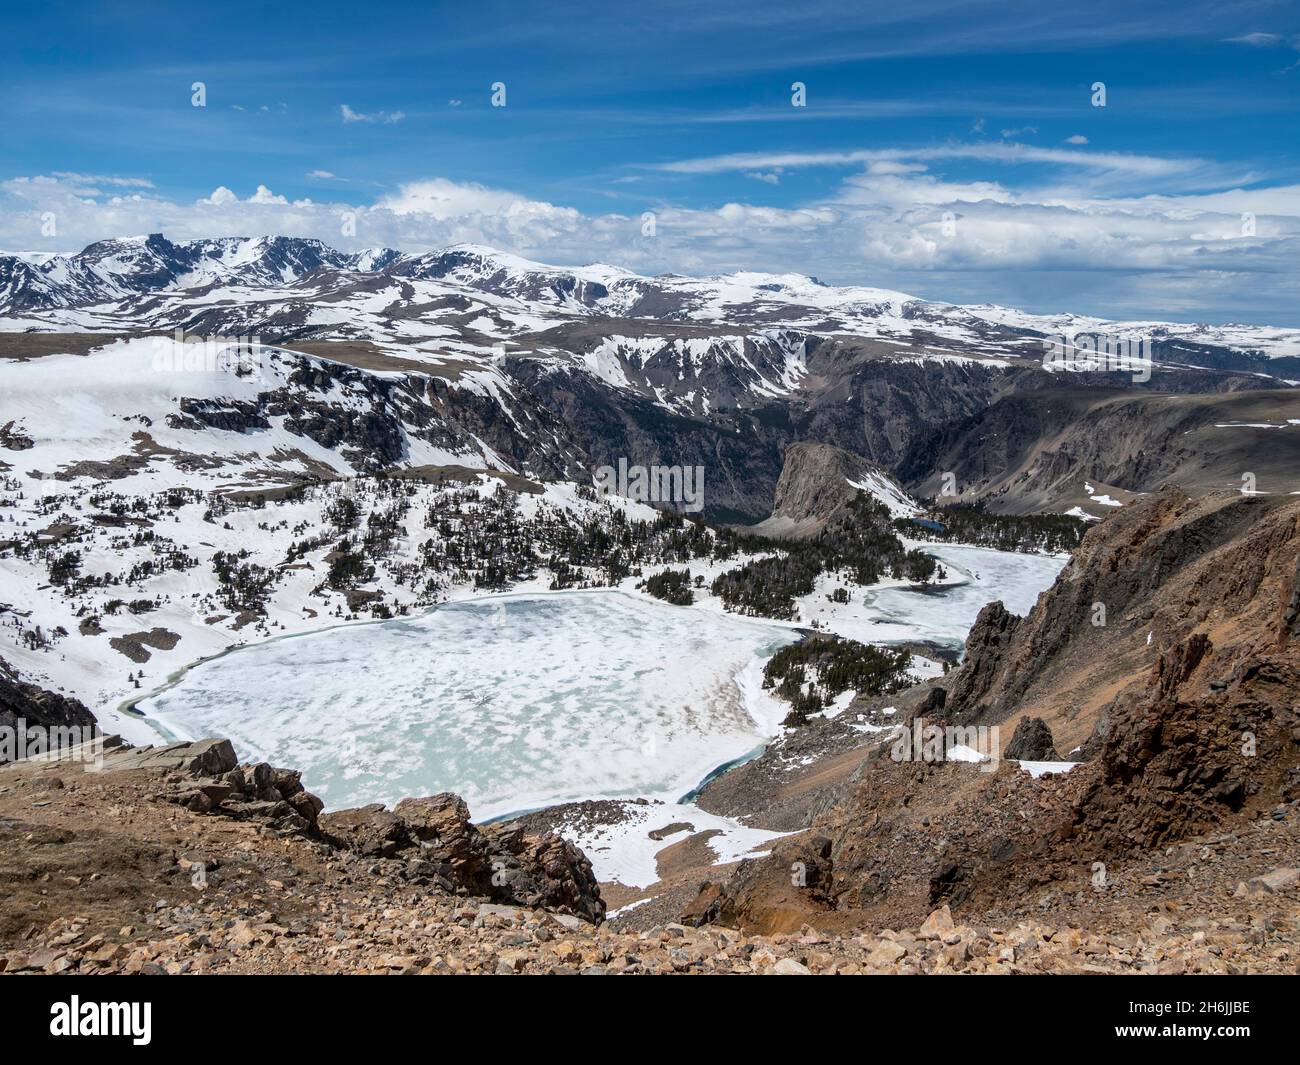 Snow-capped mountains and a frozen lake near Beartooth Pass, Wyoming, United States of America, North America Stock Photo